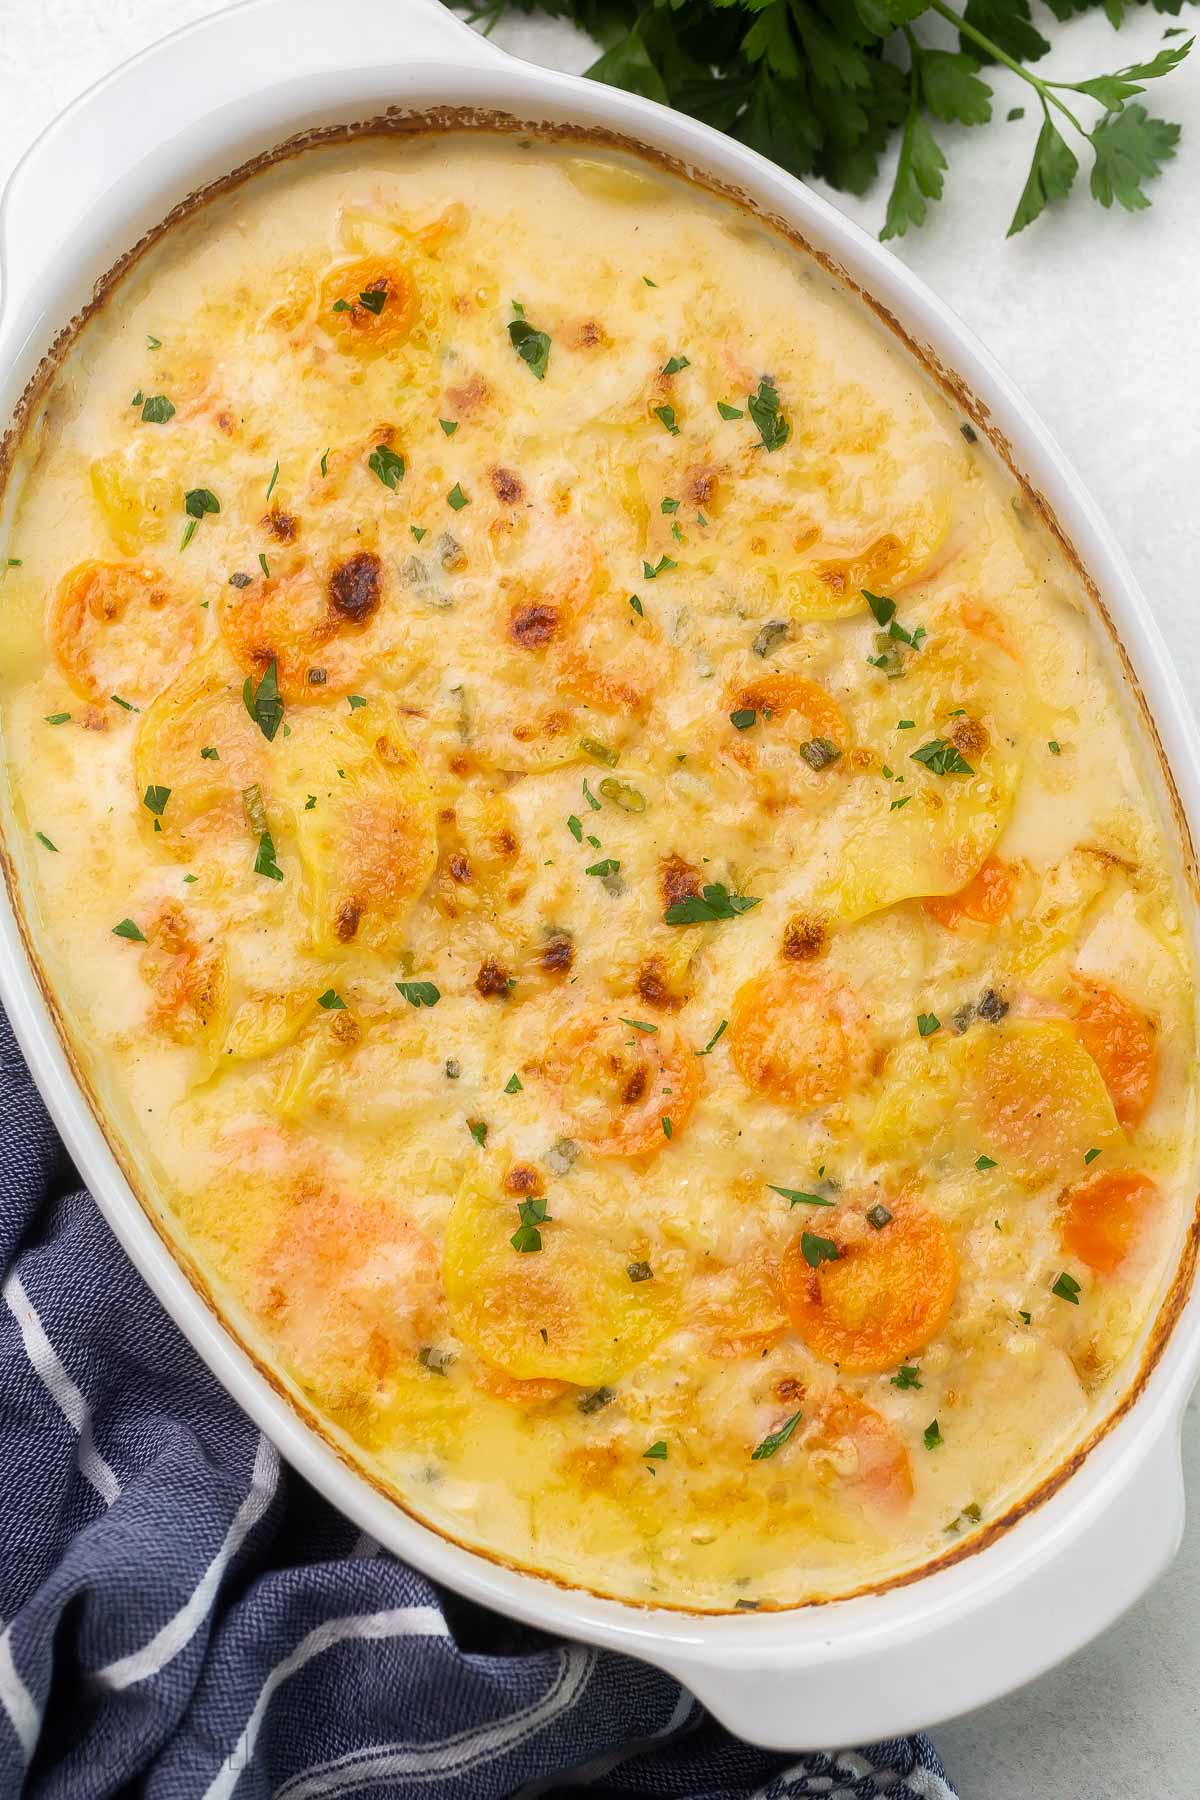 Top view of scalloped potatoes and carrots in a white dish.